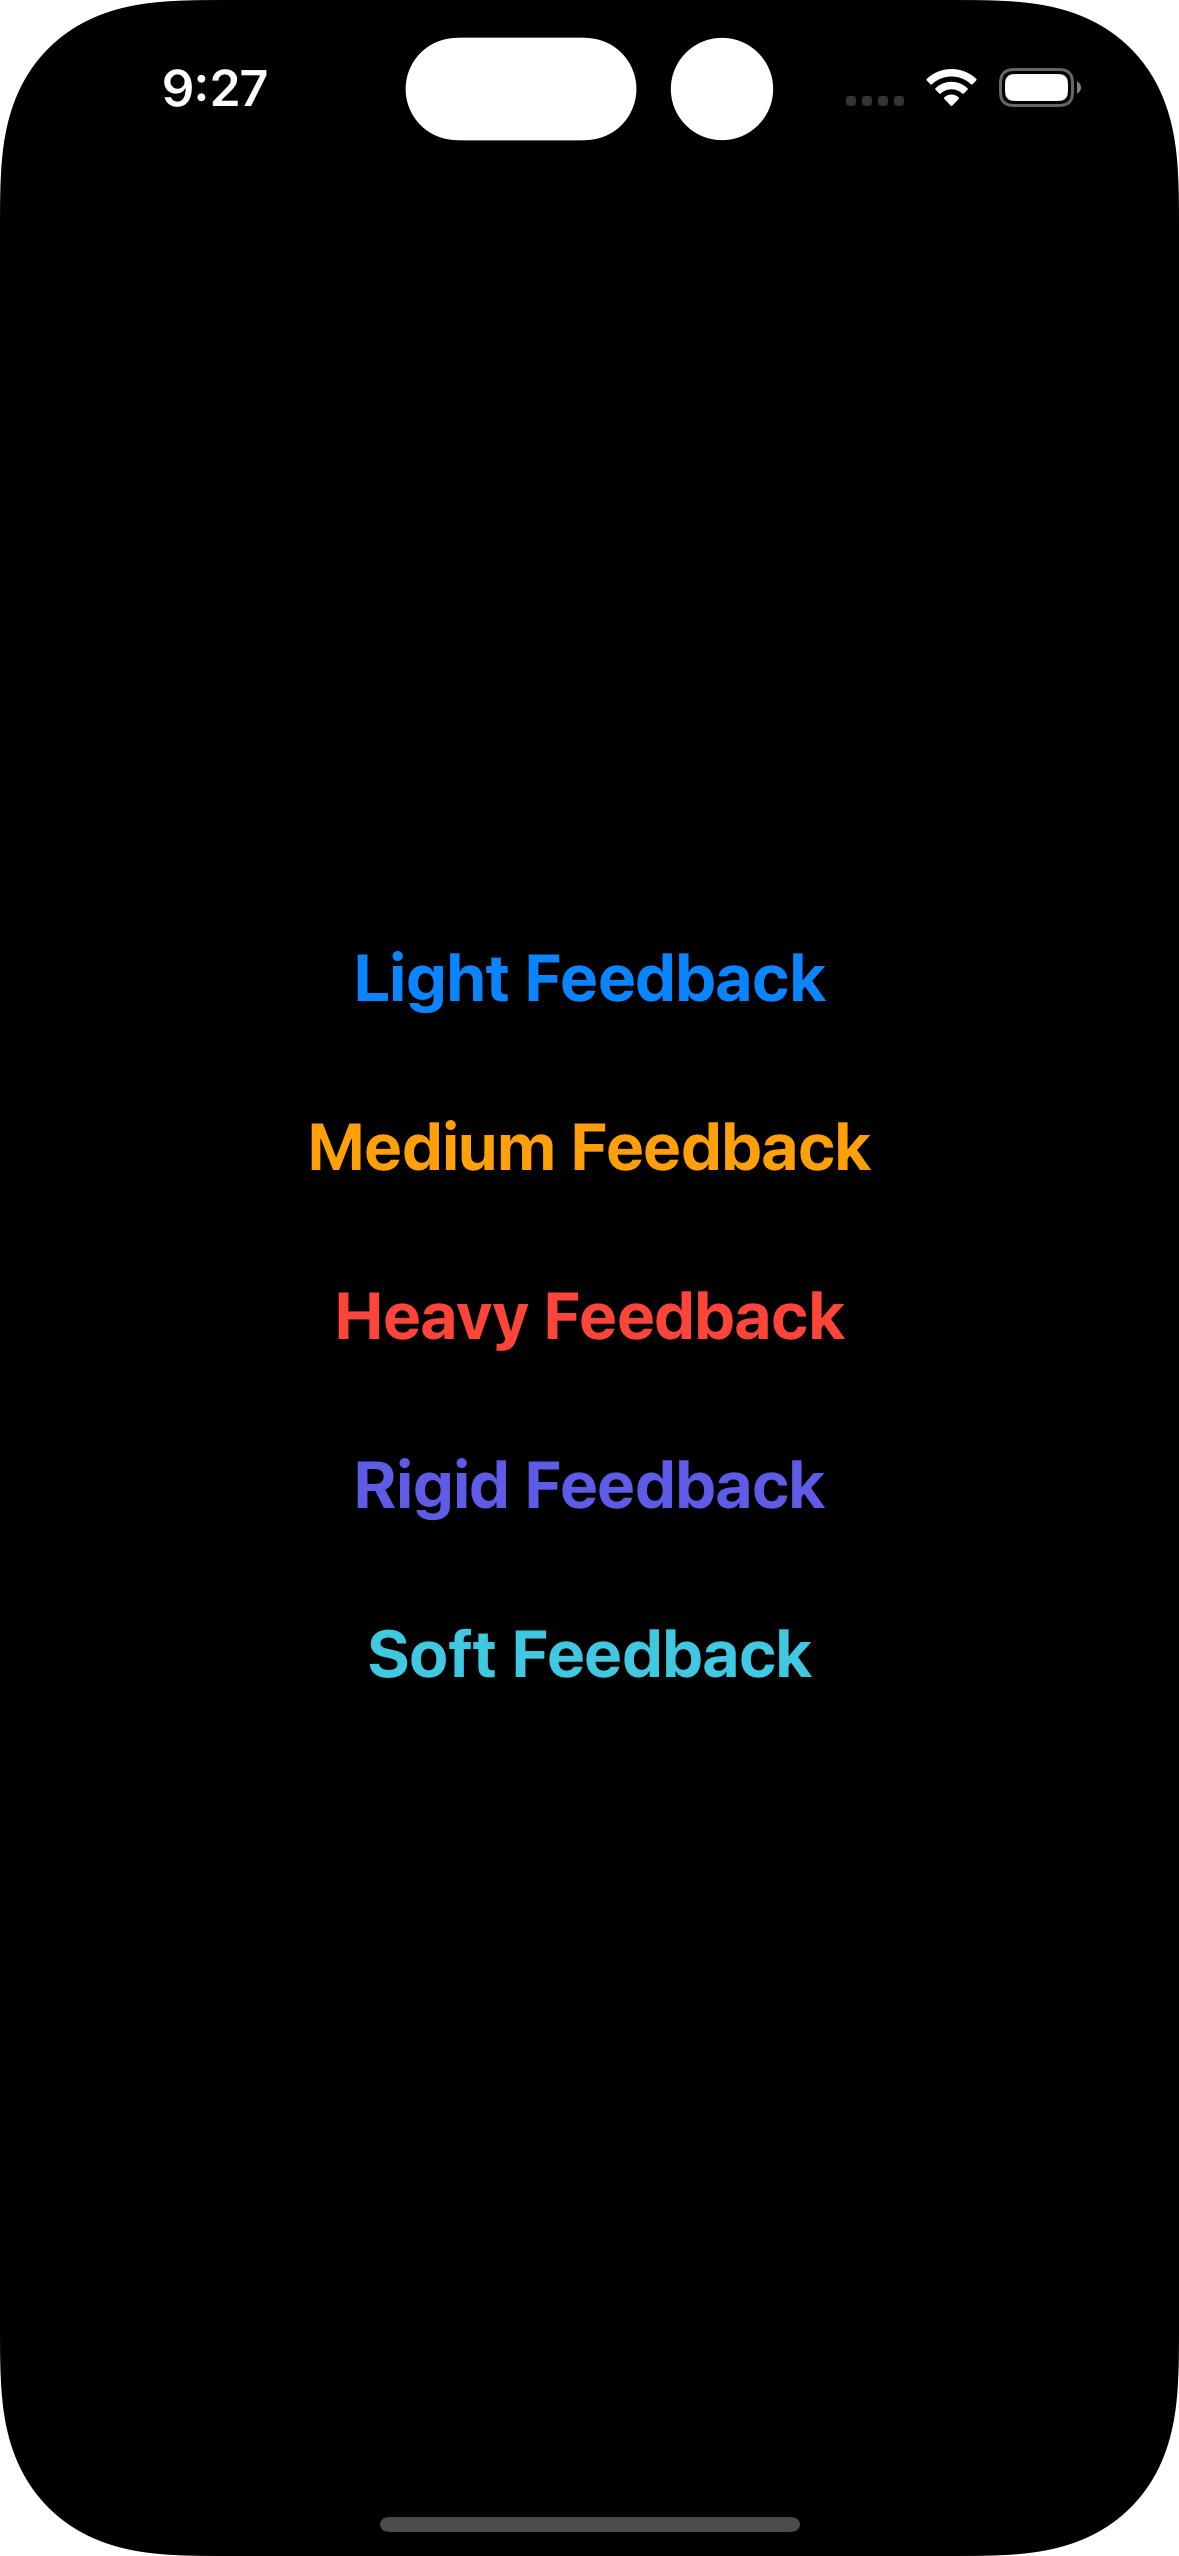 An iPhone screen showing five buttons with titles matching to a different feedback style. The buttons are stacked vertically and they have different colors, which, from top to bottom, are: blue, orange, red, indigo and teal.